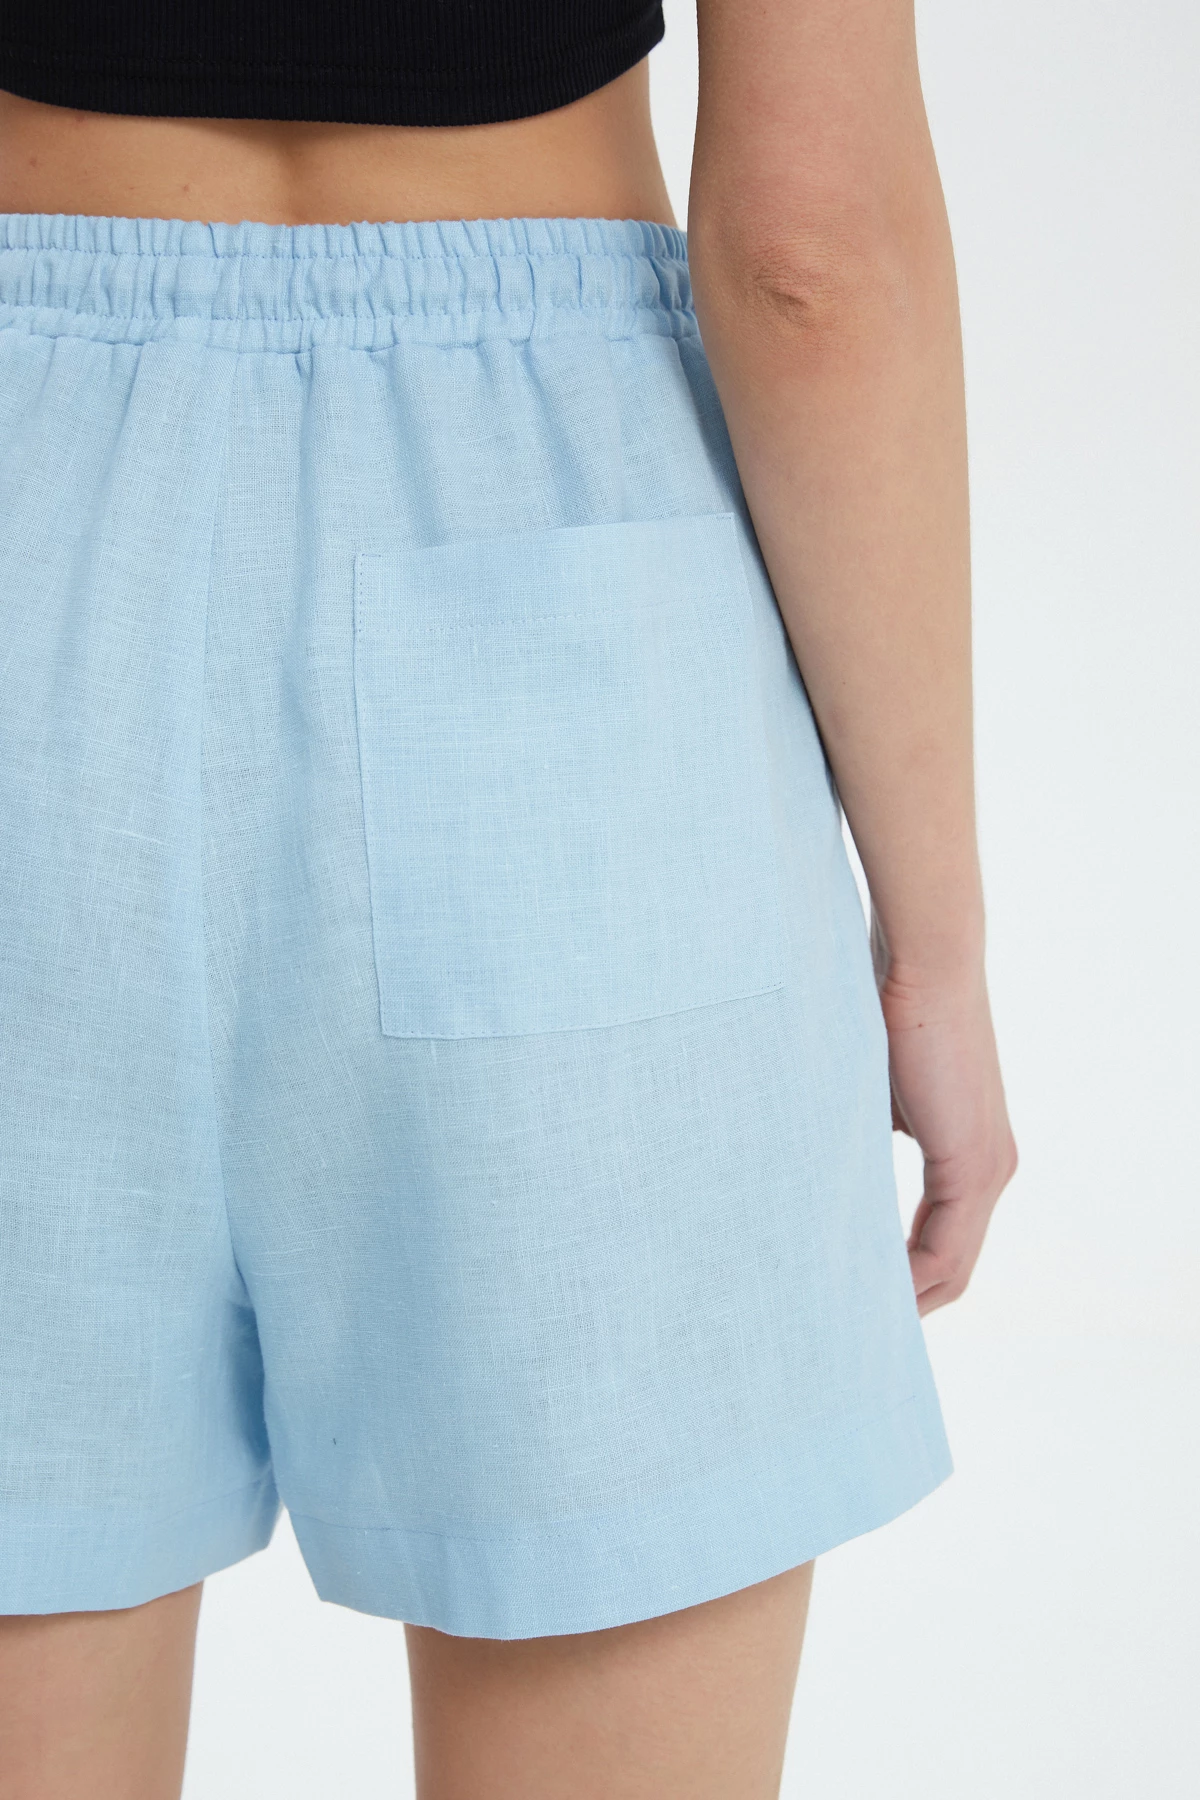 Blue loose-fit shorts made of 100% linen, photo 3